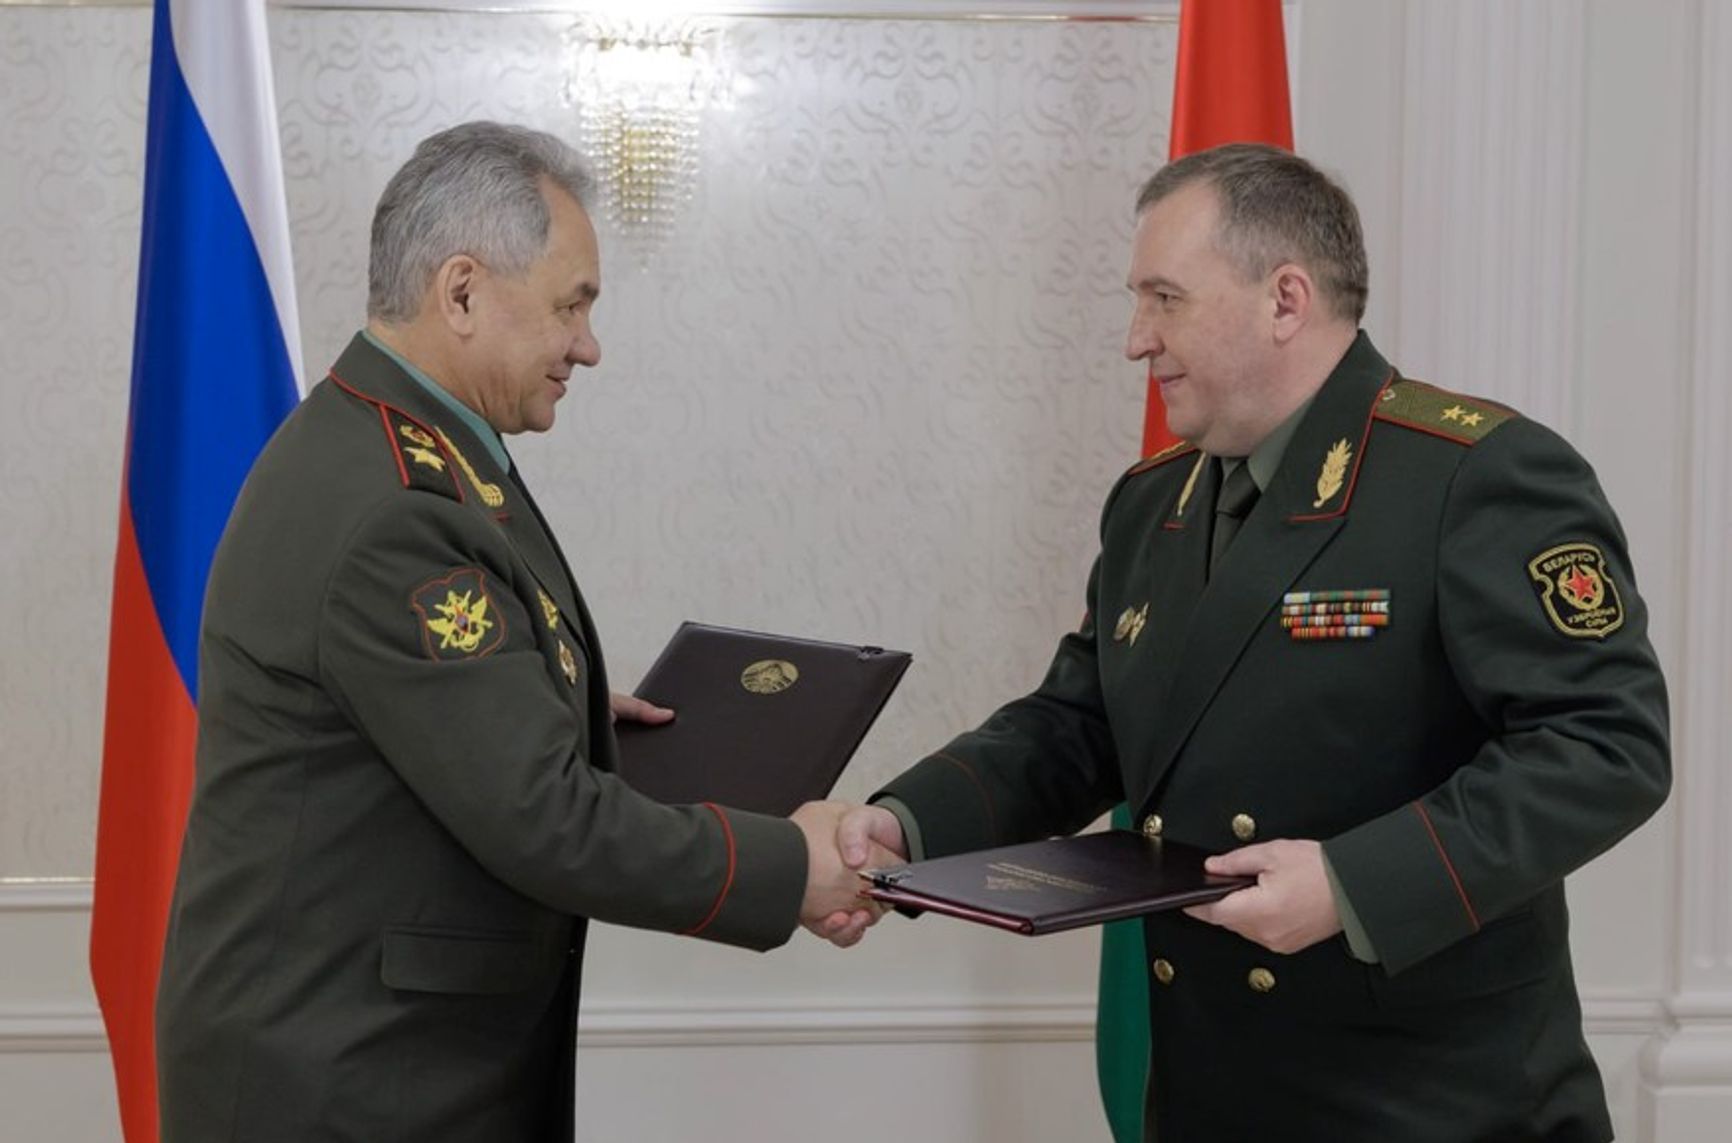 Russian Minister of Defense Sergei Shoigu and his Belarusian counterpart Viktor Khrenin after signing the terms of Russian nuclear weapons deployment to Belarus